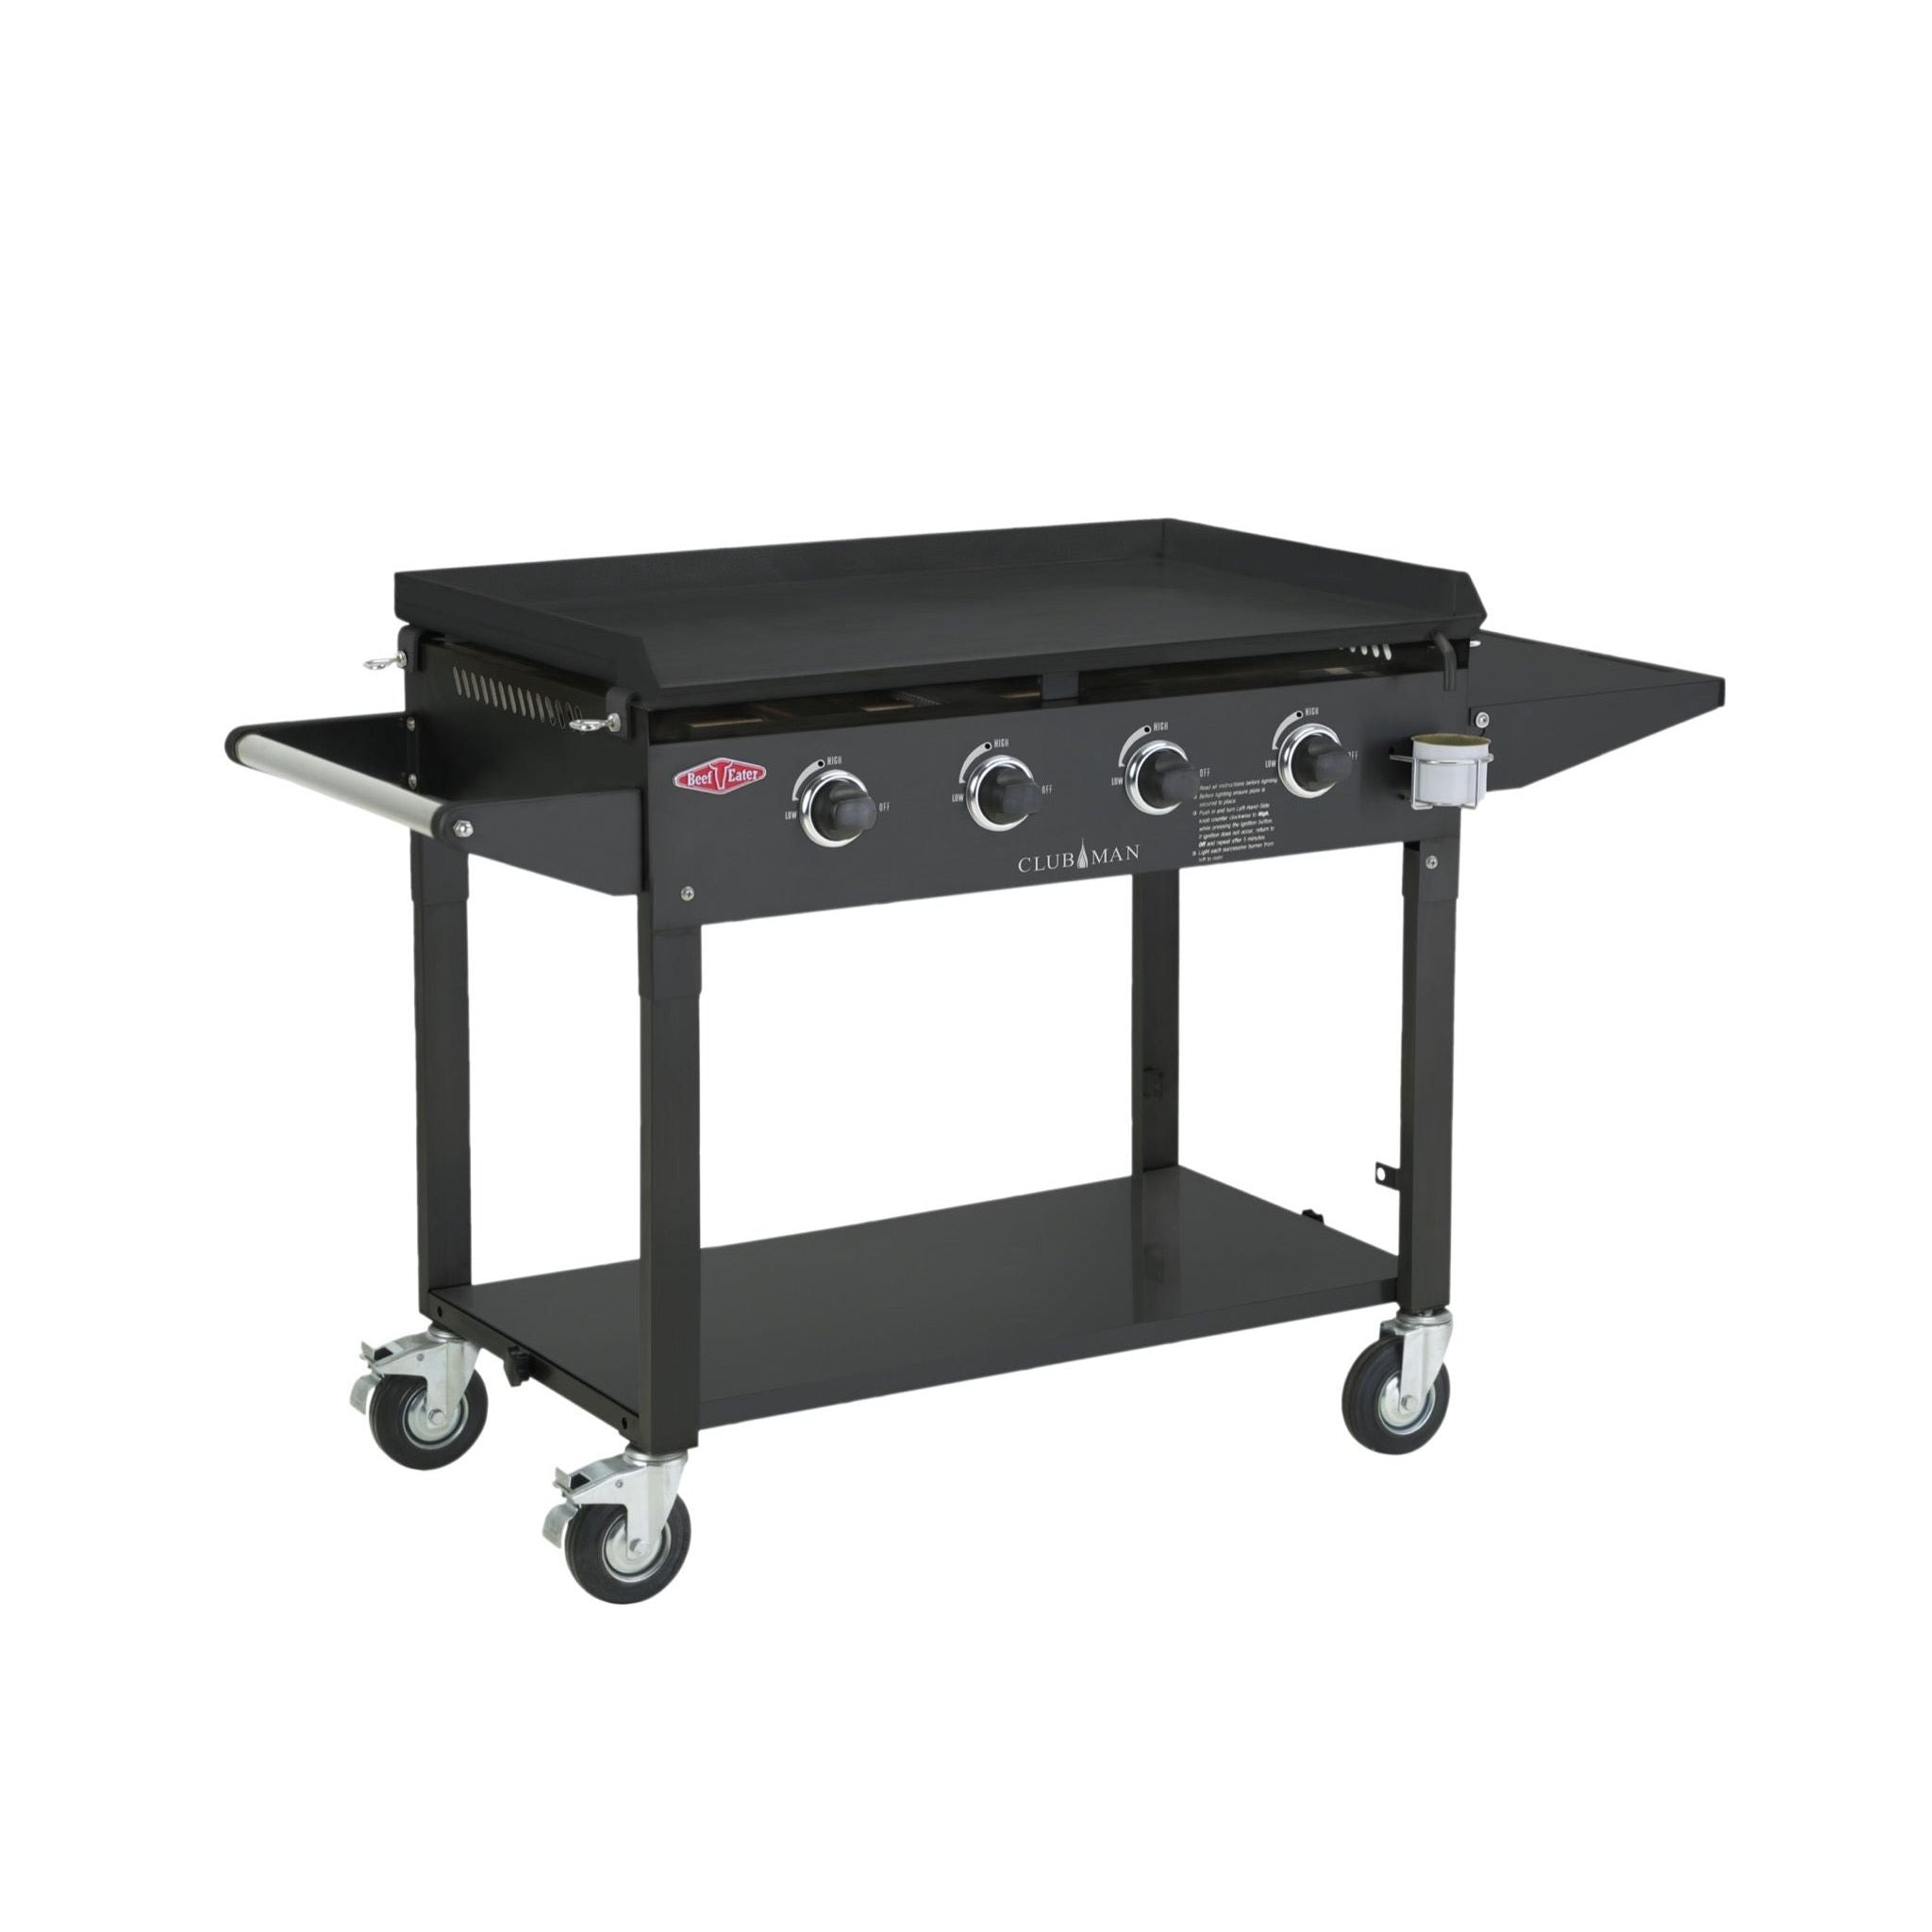 BeefEater Clubman Series - Portable 4 Burner Gas BBQ (Mild Black or Stainless Steel)